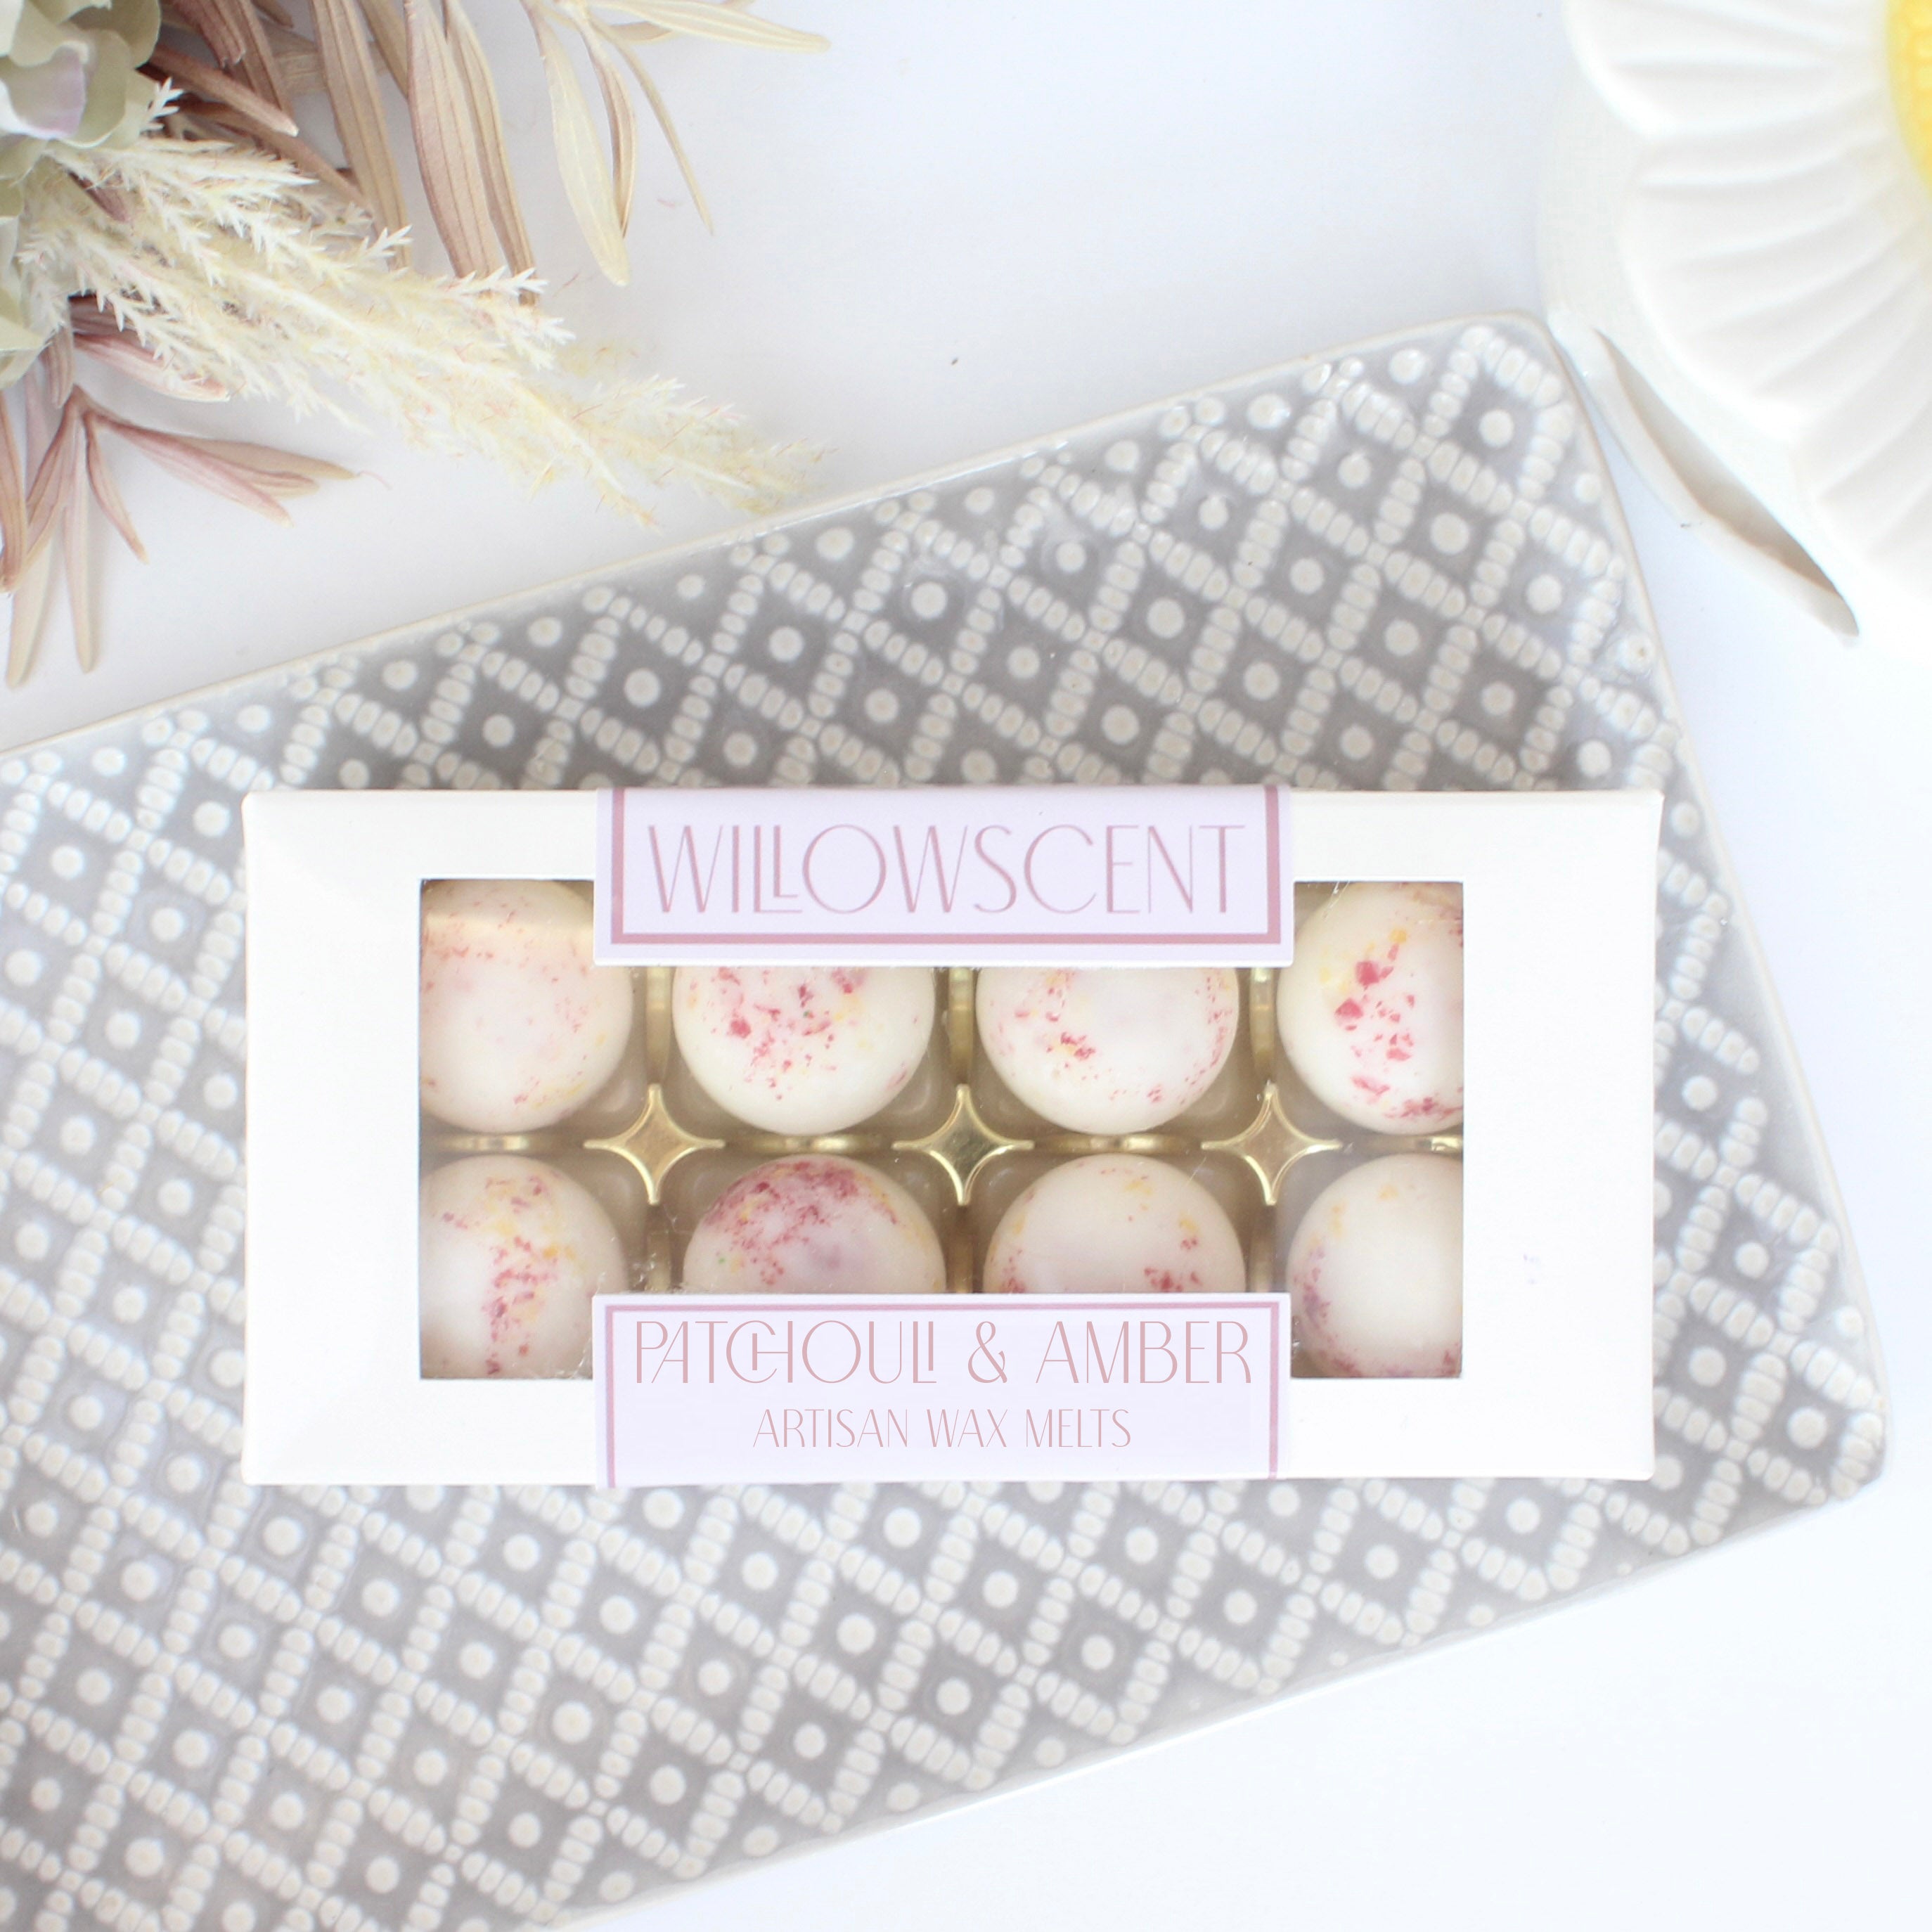 Patchouli & Amber Scented Wax Melts